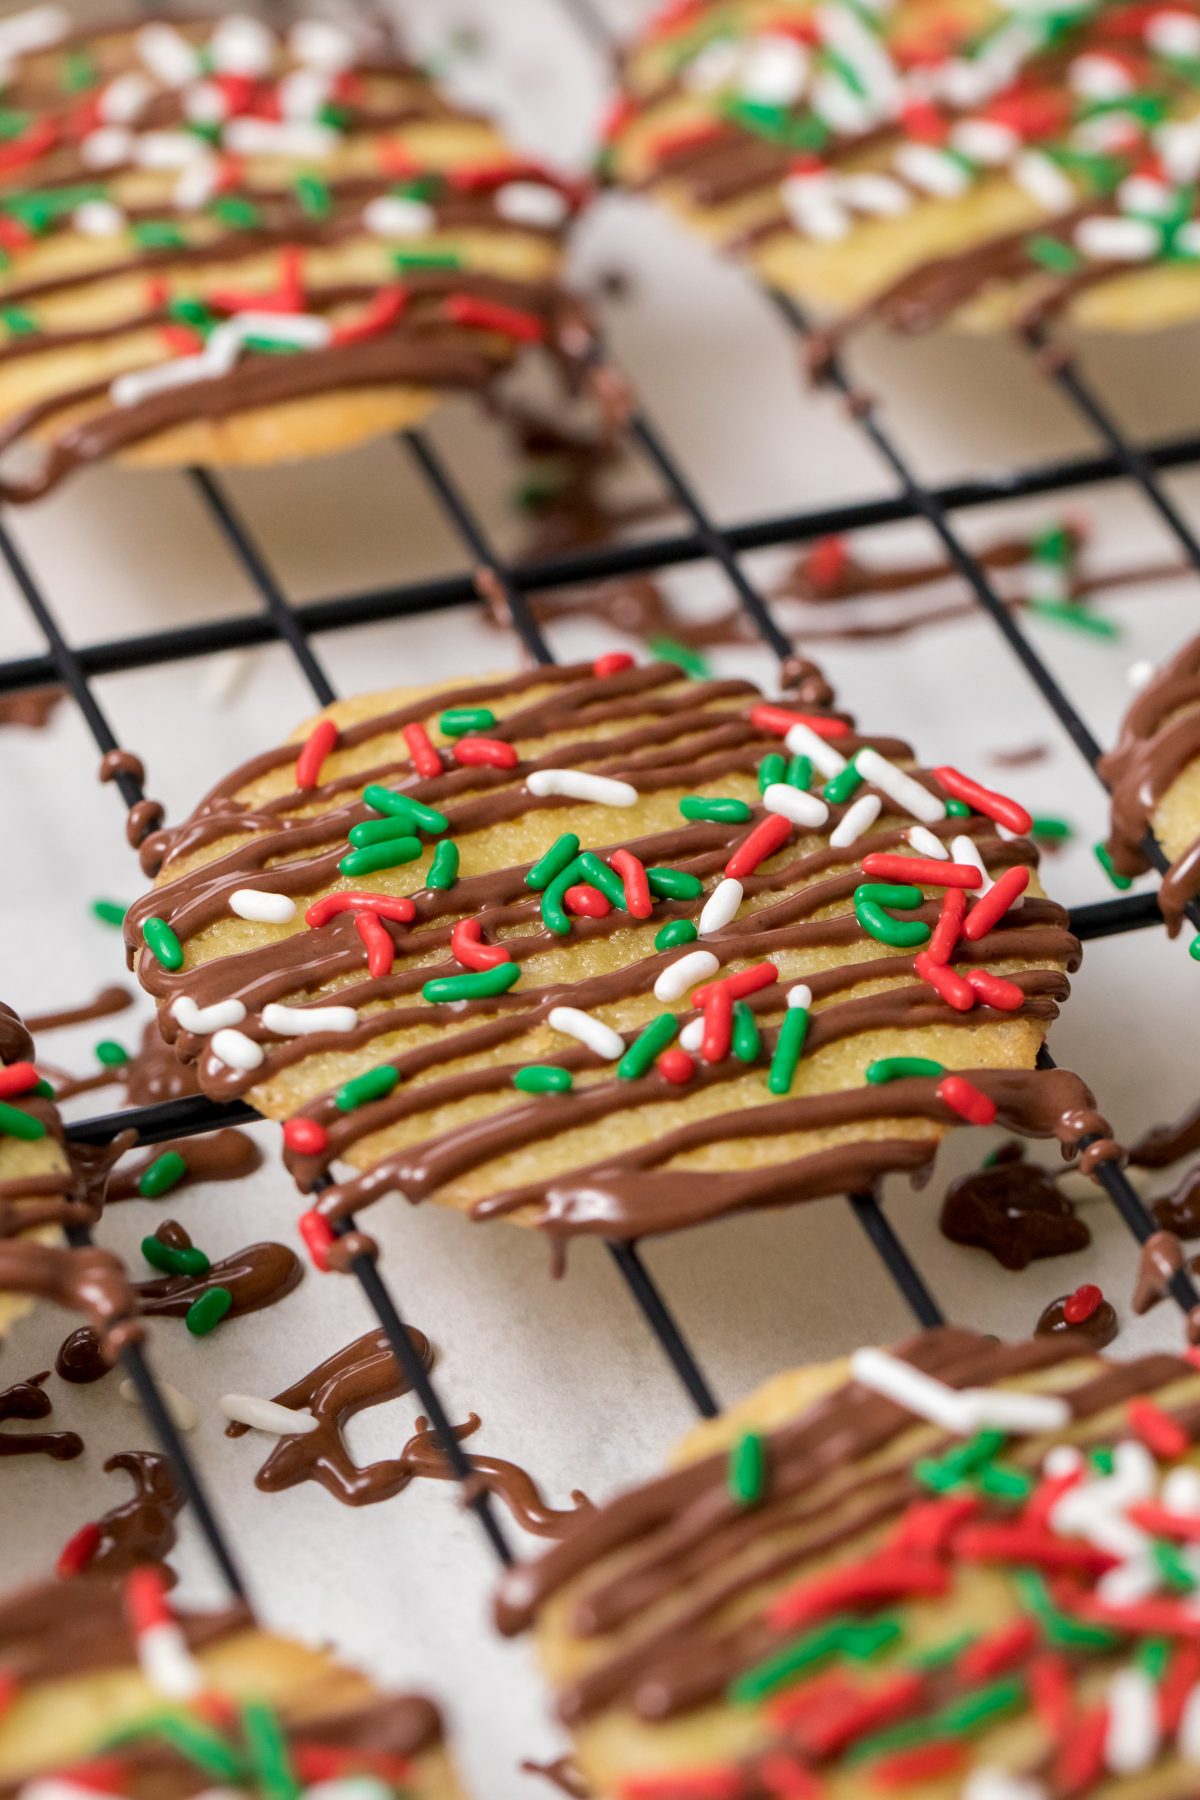 5D4B6866 - Chocolate Drizzled Christmas Cookies with Holiday Jimmies